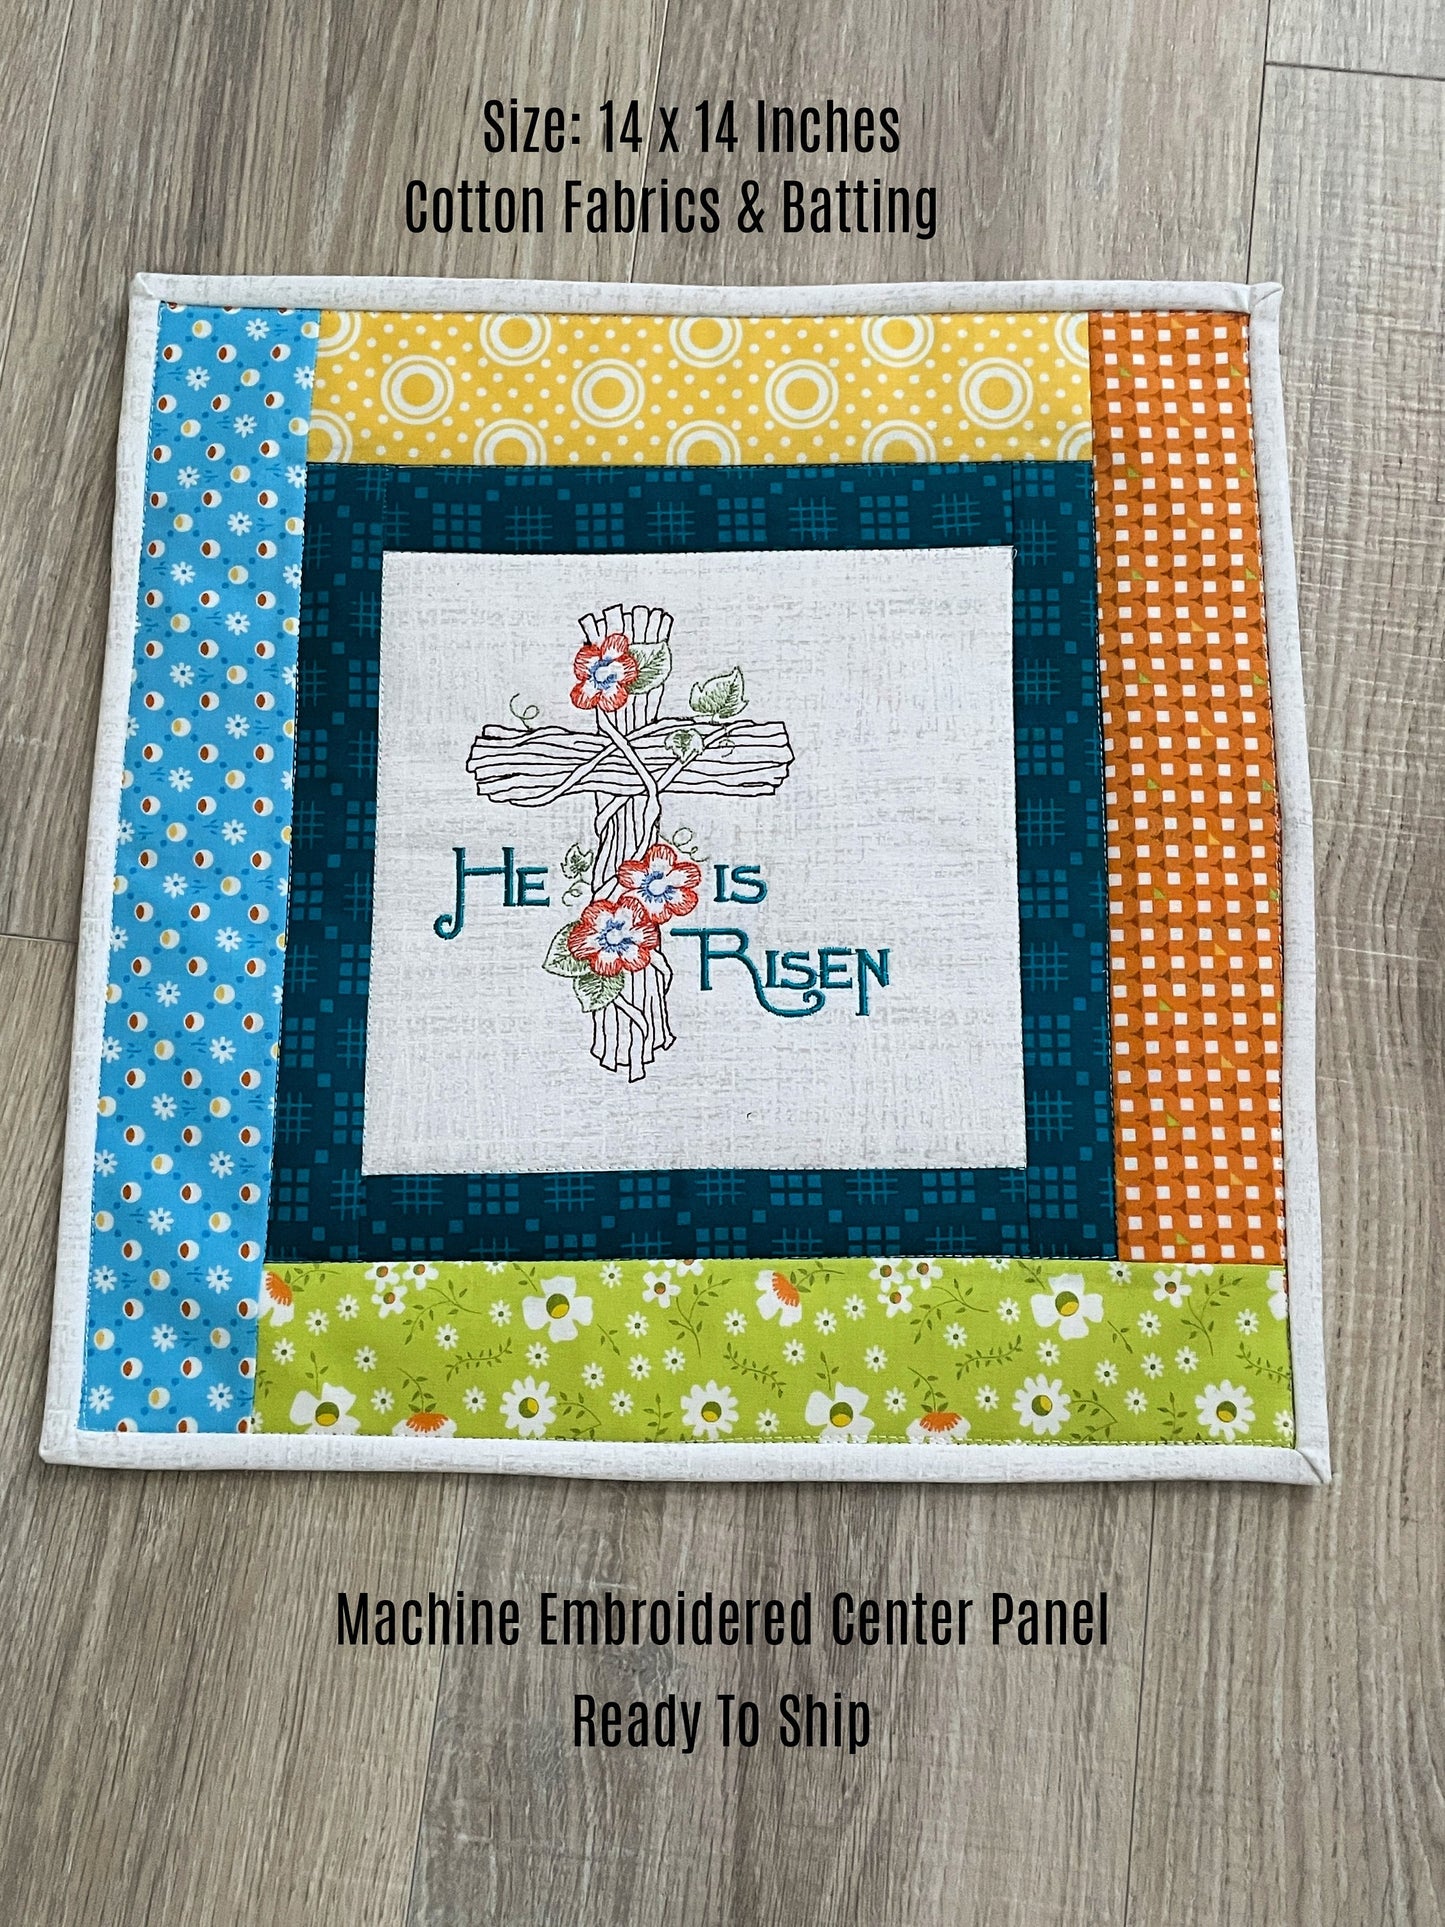 Handmade Mini Quilt with Embroidery, Easter Decor